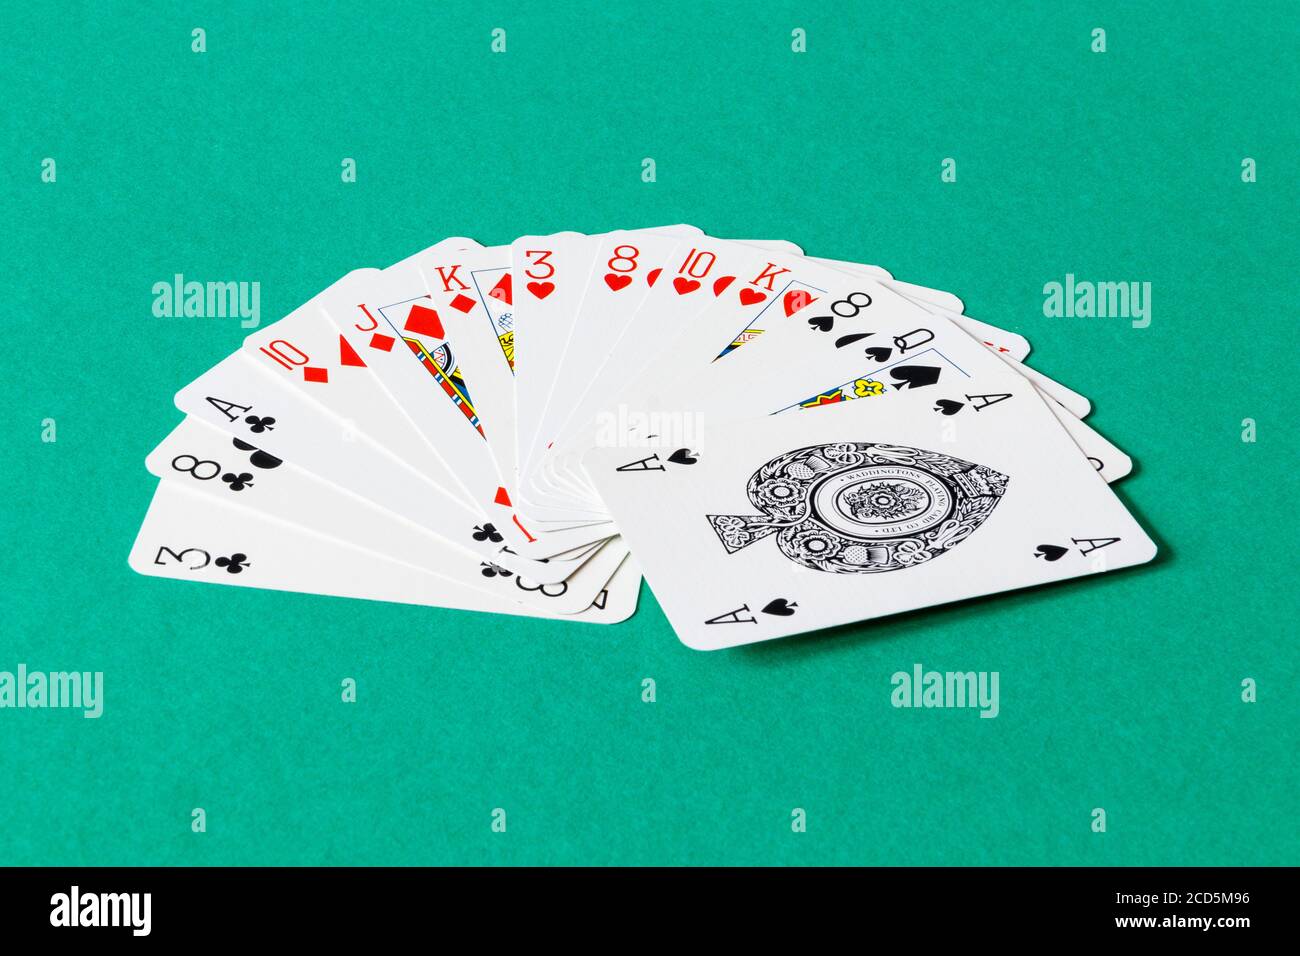 An evenly spread (4333 distribution) biddable hand of 13 cards, sorted into suits and rank, in a game of contract bridge, showing 17 high-card points Stock Photo